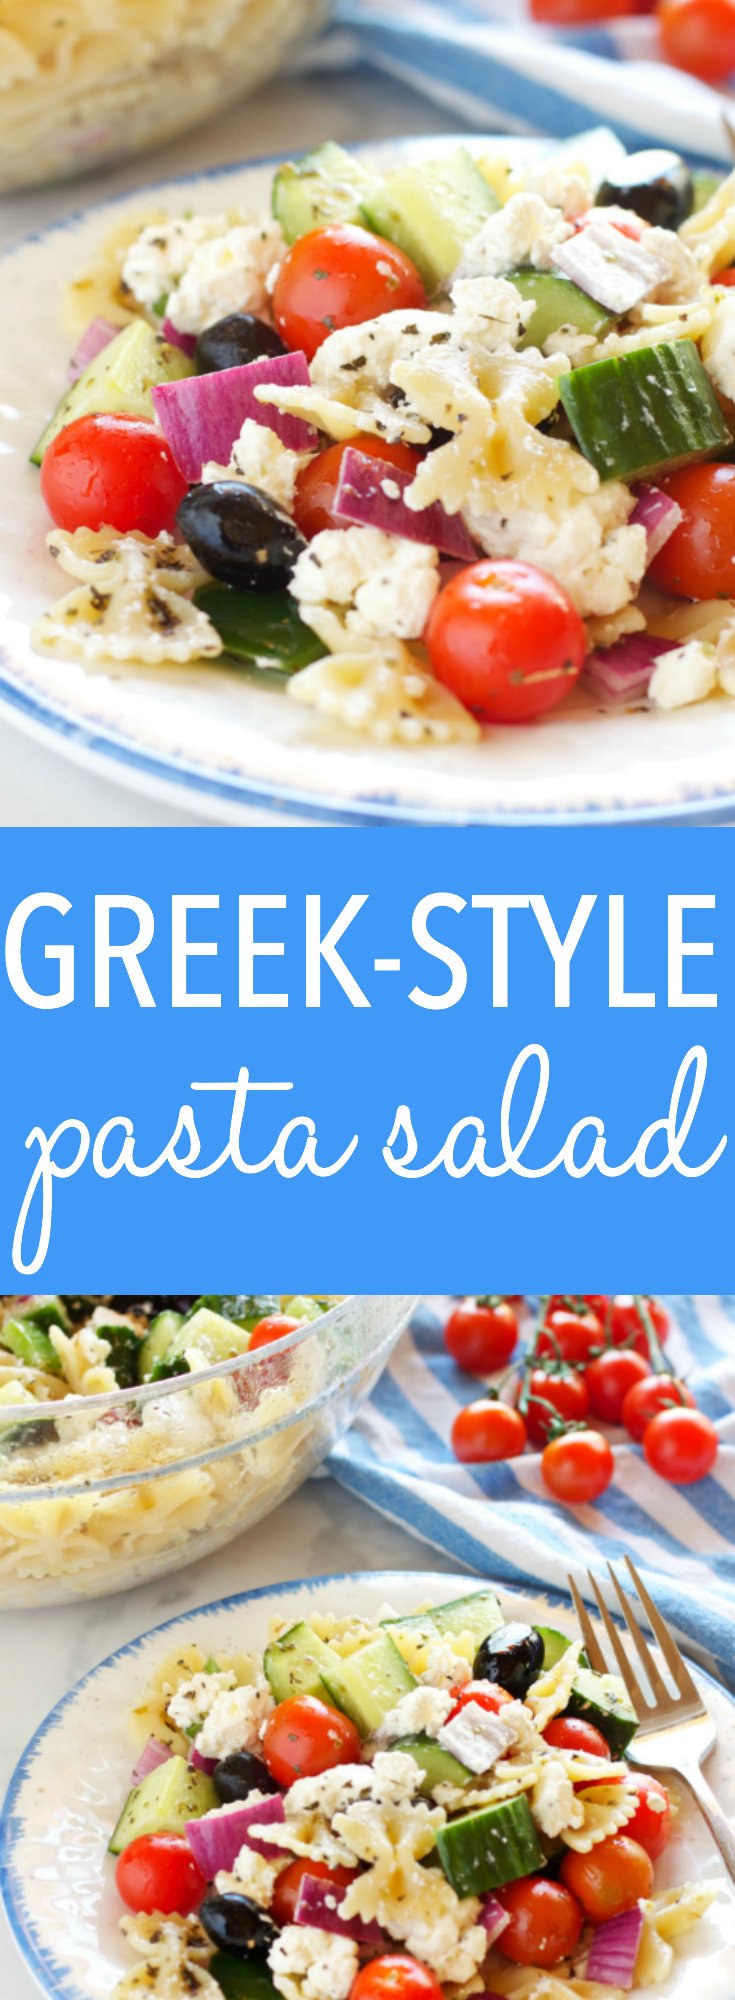 This Quick and Easy Greek Pasta Salad is the perfect easy summer side dish recipe made from healthy ingredients, and bursting with authentic Greek flavors! Recipe from thebusybaker.ca! via @busybakerblog